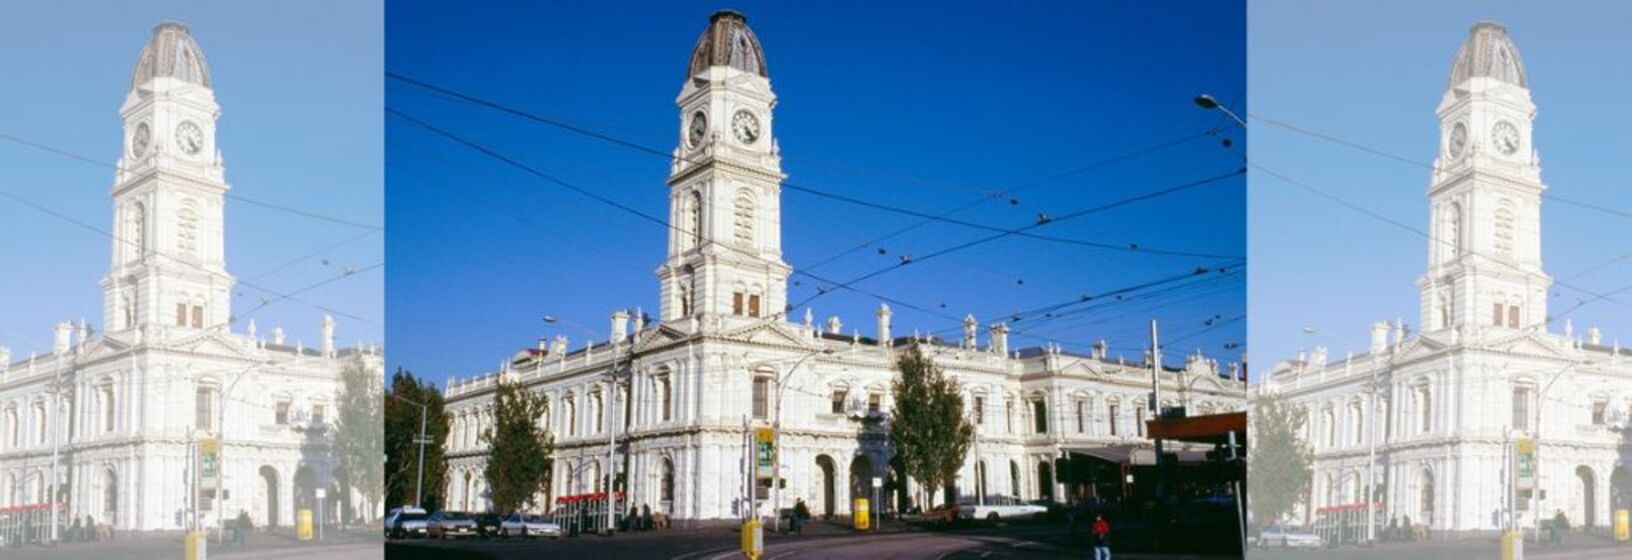 White building with tall clock tower at the front of the complex, tram tracks lie in front of the building and overhead tram wires can be seen in the foreground